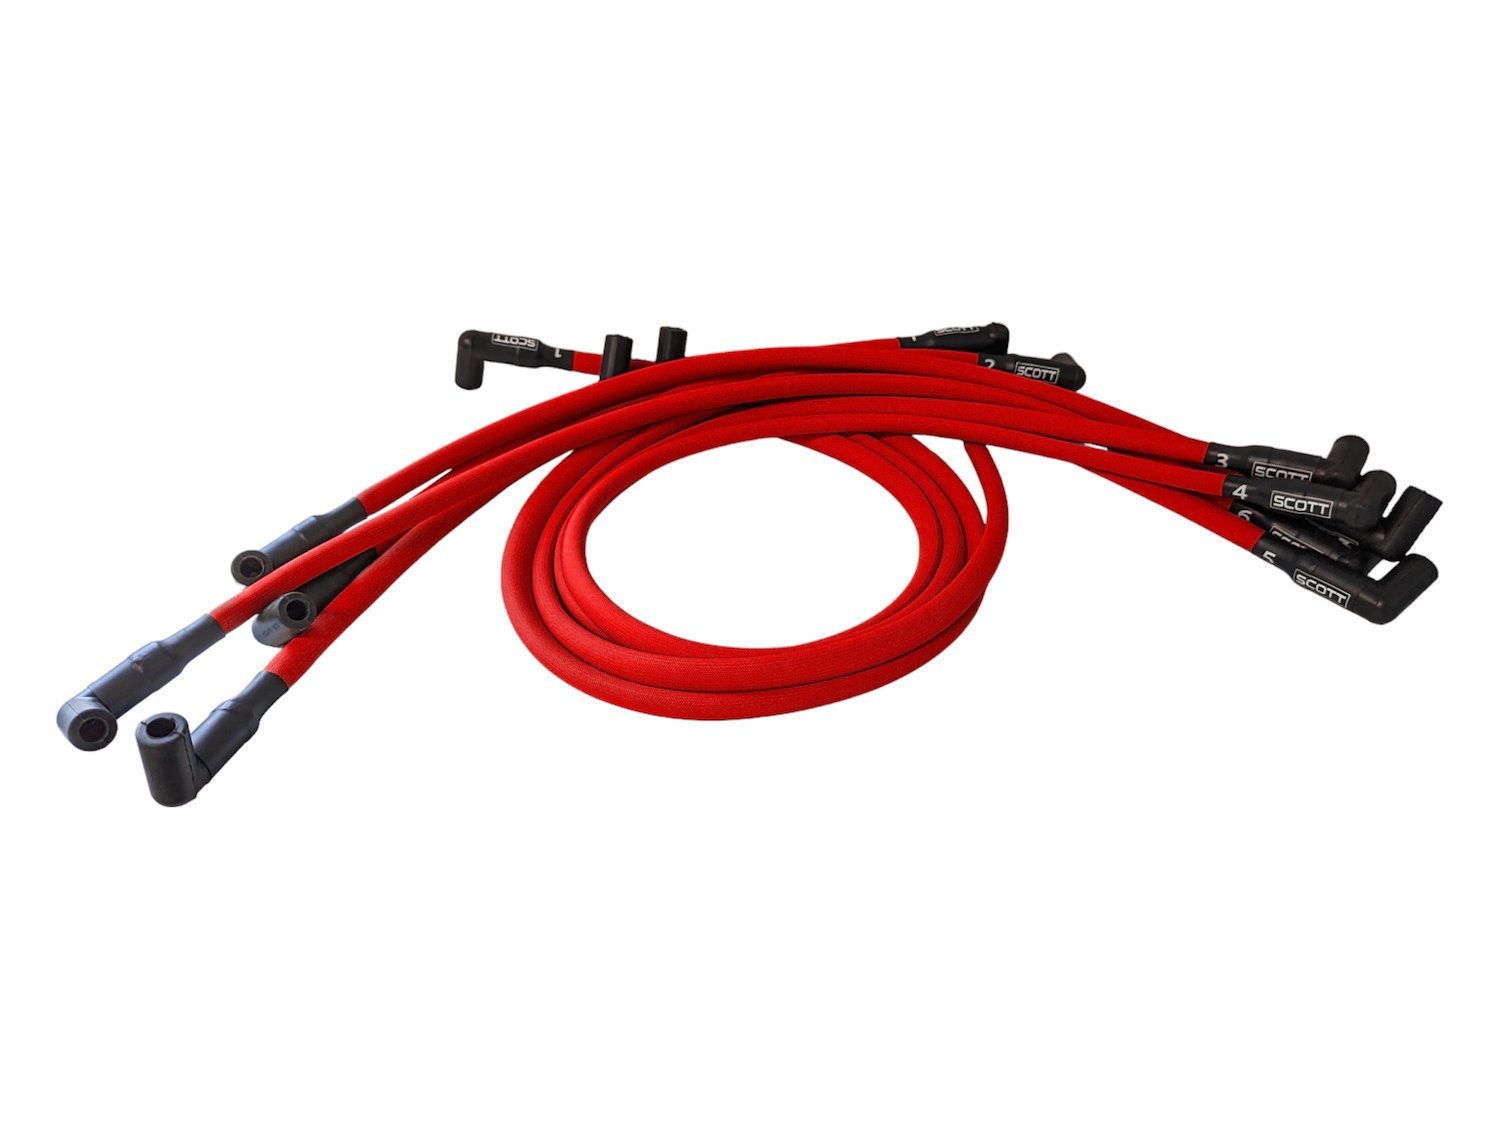 SPW-PS-530-2 High-Performance Fiberglass-Oversleeved Spark Plug Wire Set for Big Block Ford Dragster, Under Header [Red]